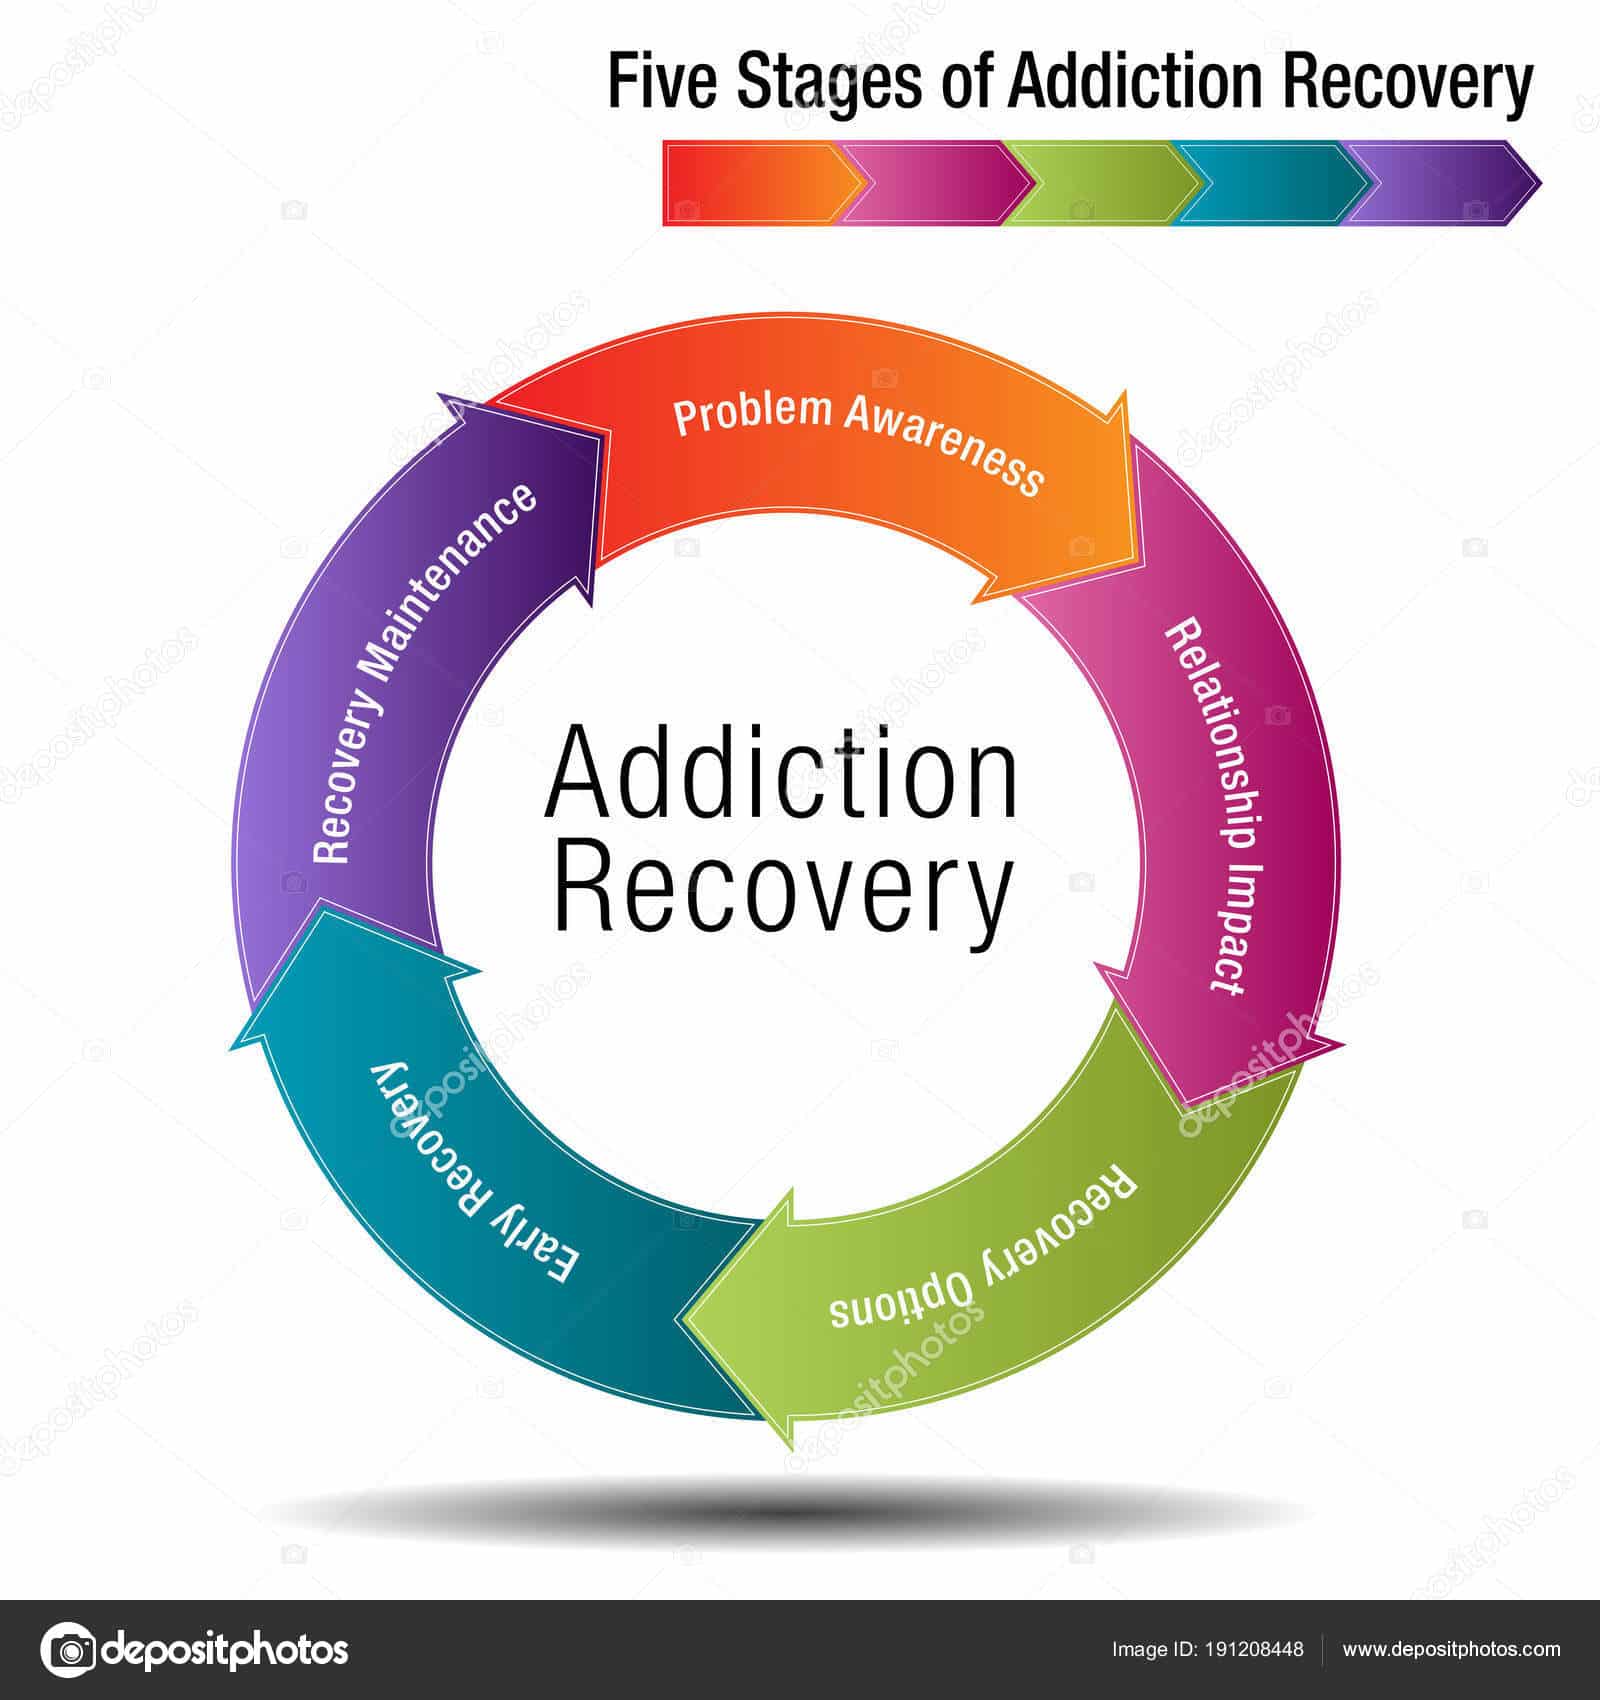 Five Stages of Addiction Recovery  Stock Vector © cteconsulting #191208448